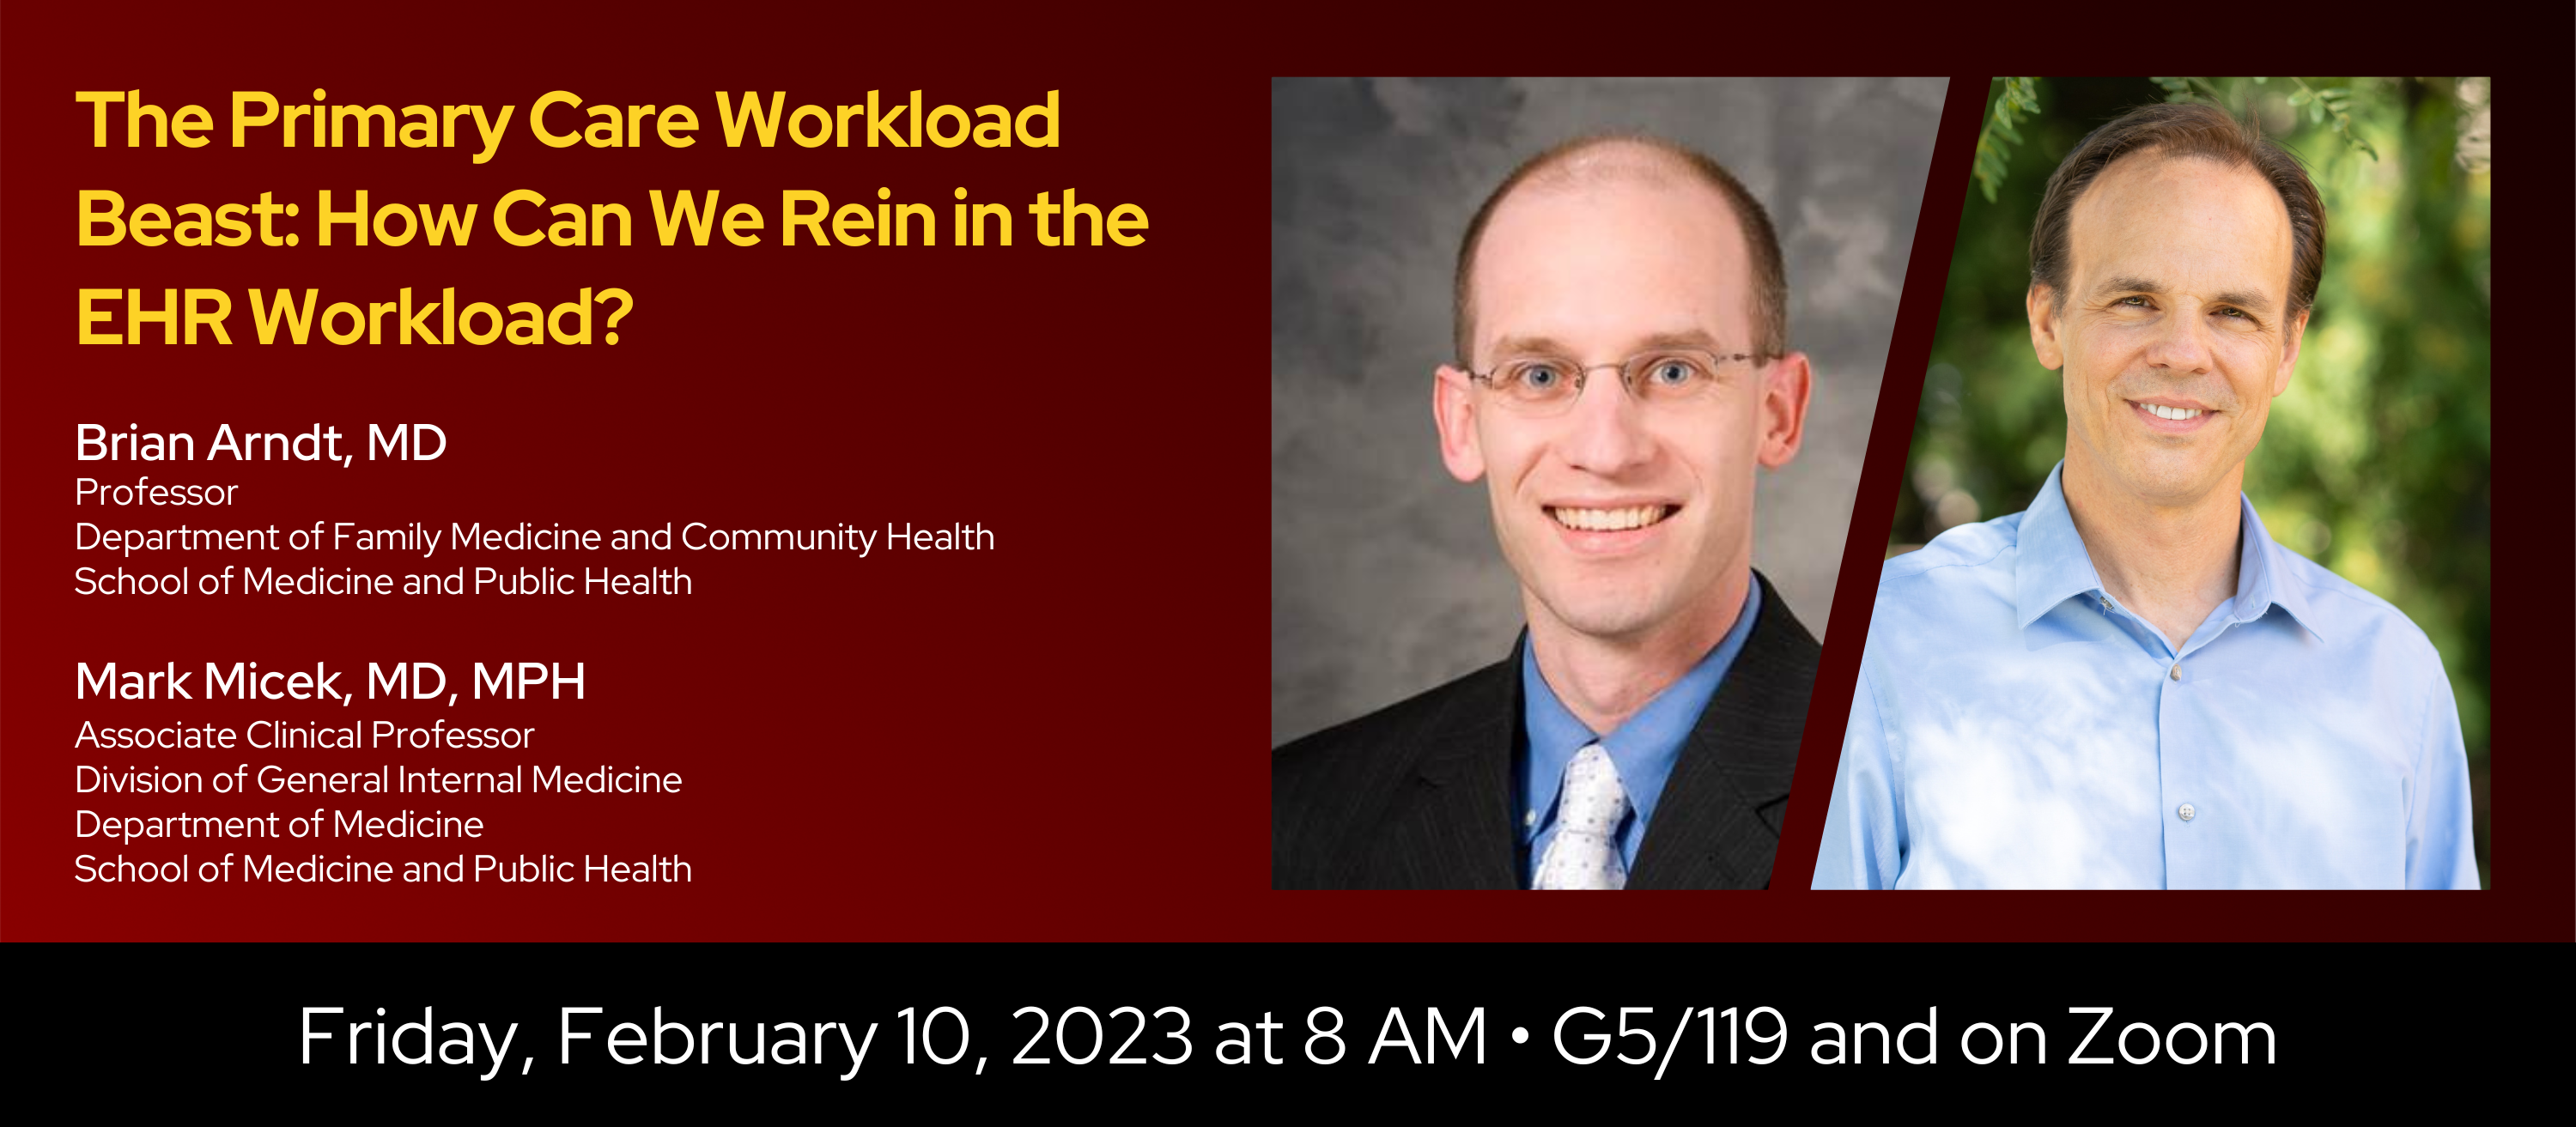 Title: The Primary Care Workload Beast: How Can We Rein in the EHR Workload